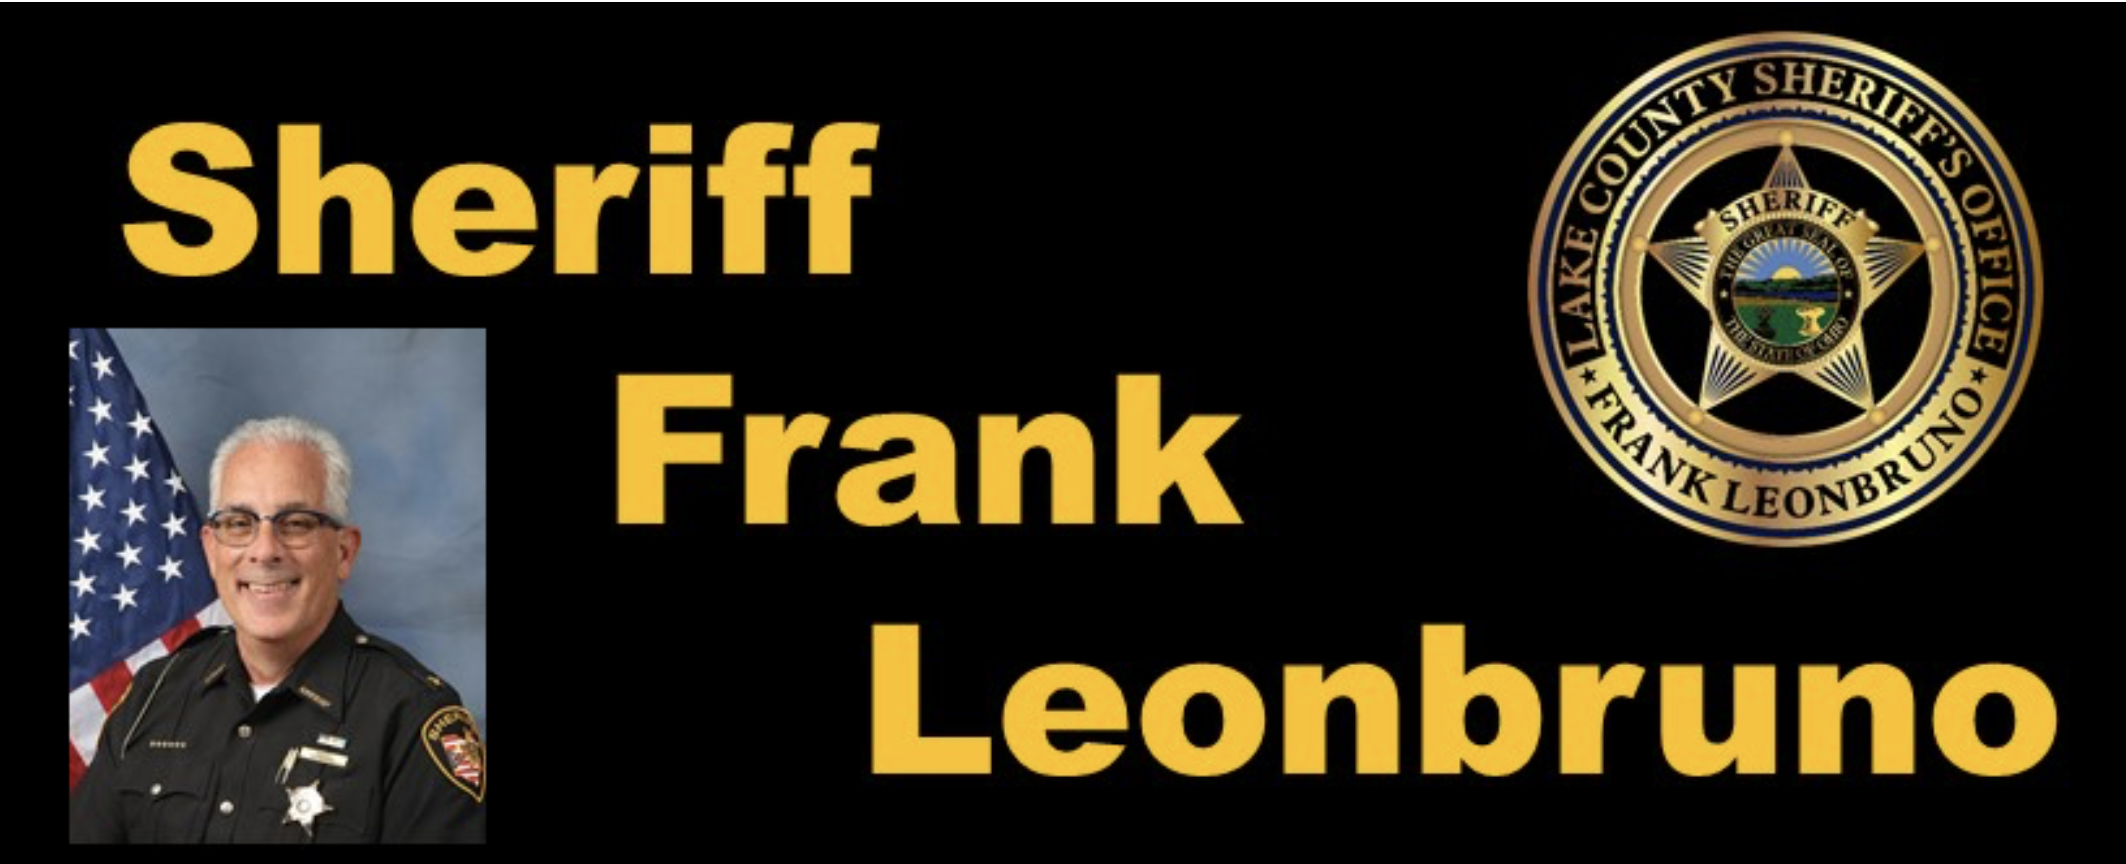 Save the Date -  KEEP Frank Leonbruno as Sheriff of Lake County, Ohio.